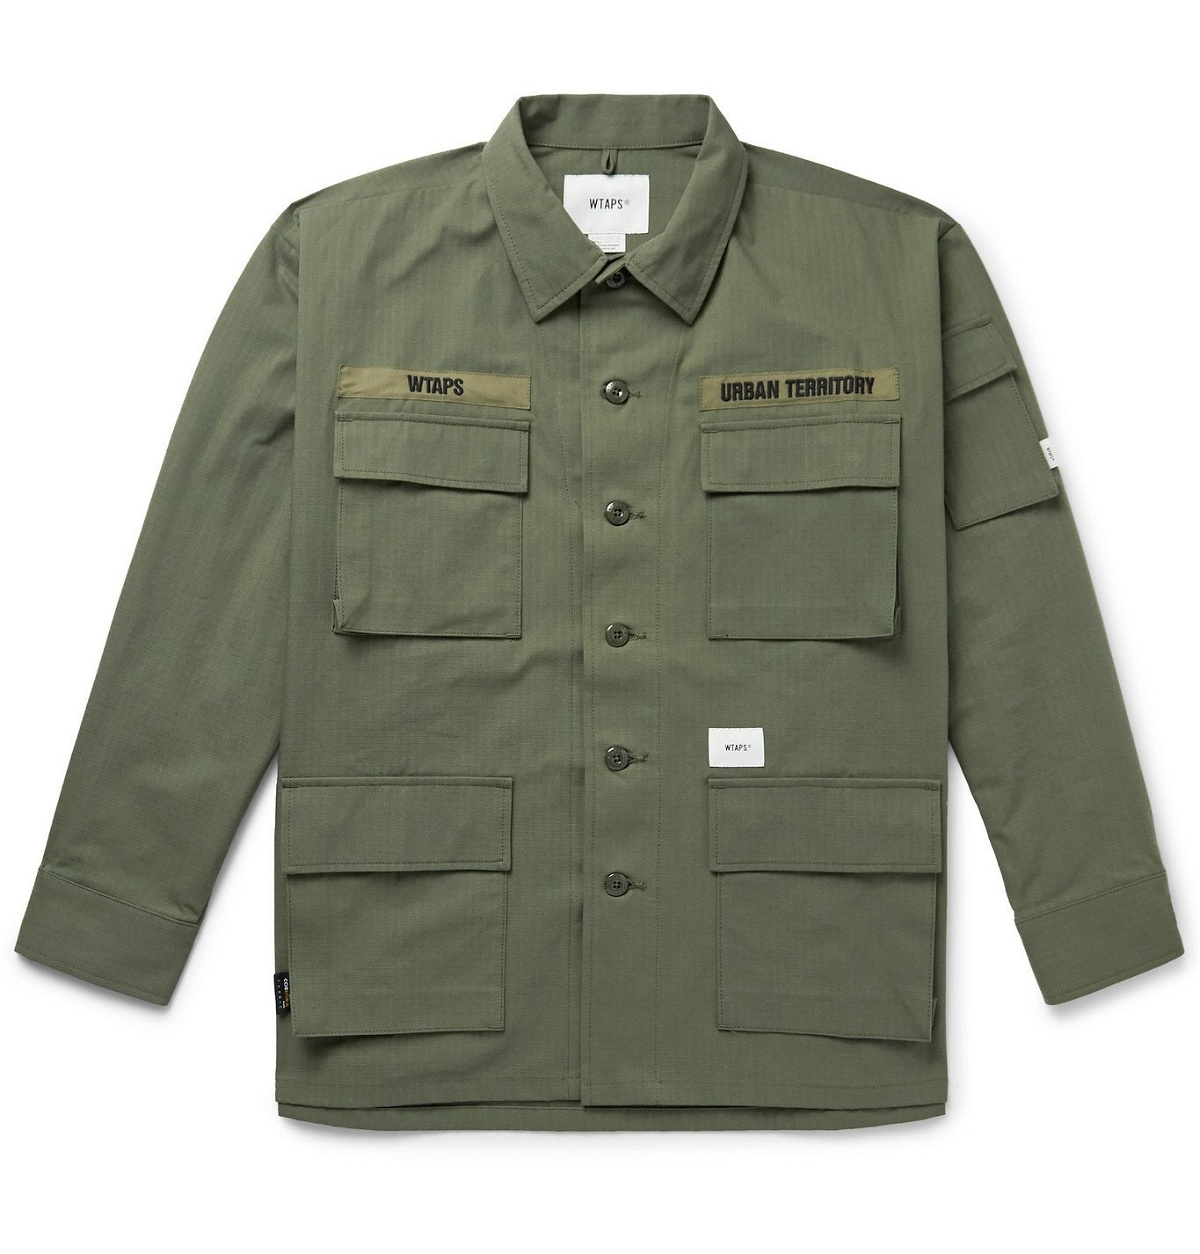 WTAPS - Jungle Embroidered CORDURA and Cotton-Blend Ripstop Overshirt -  Green